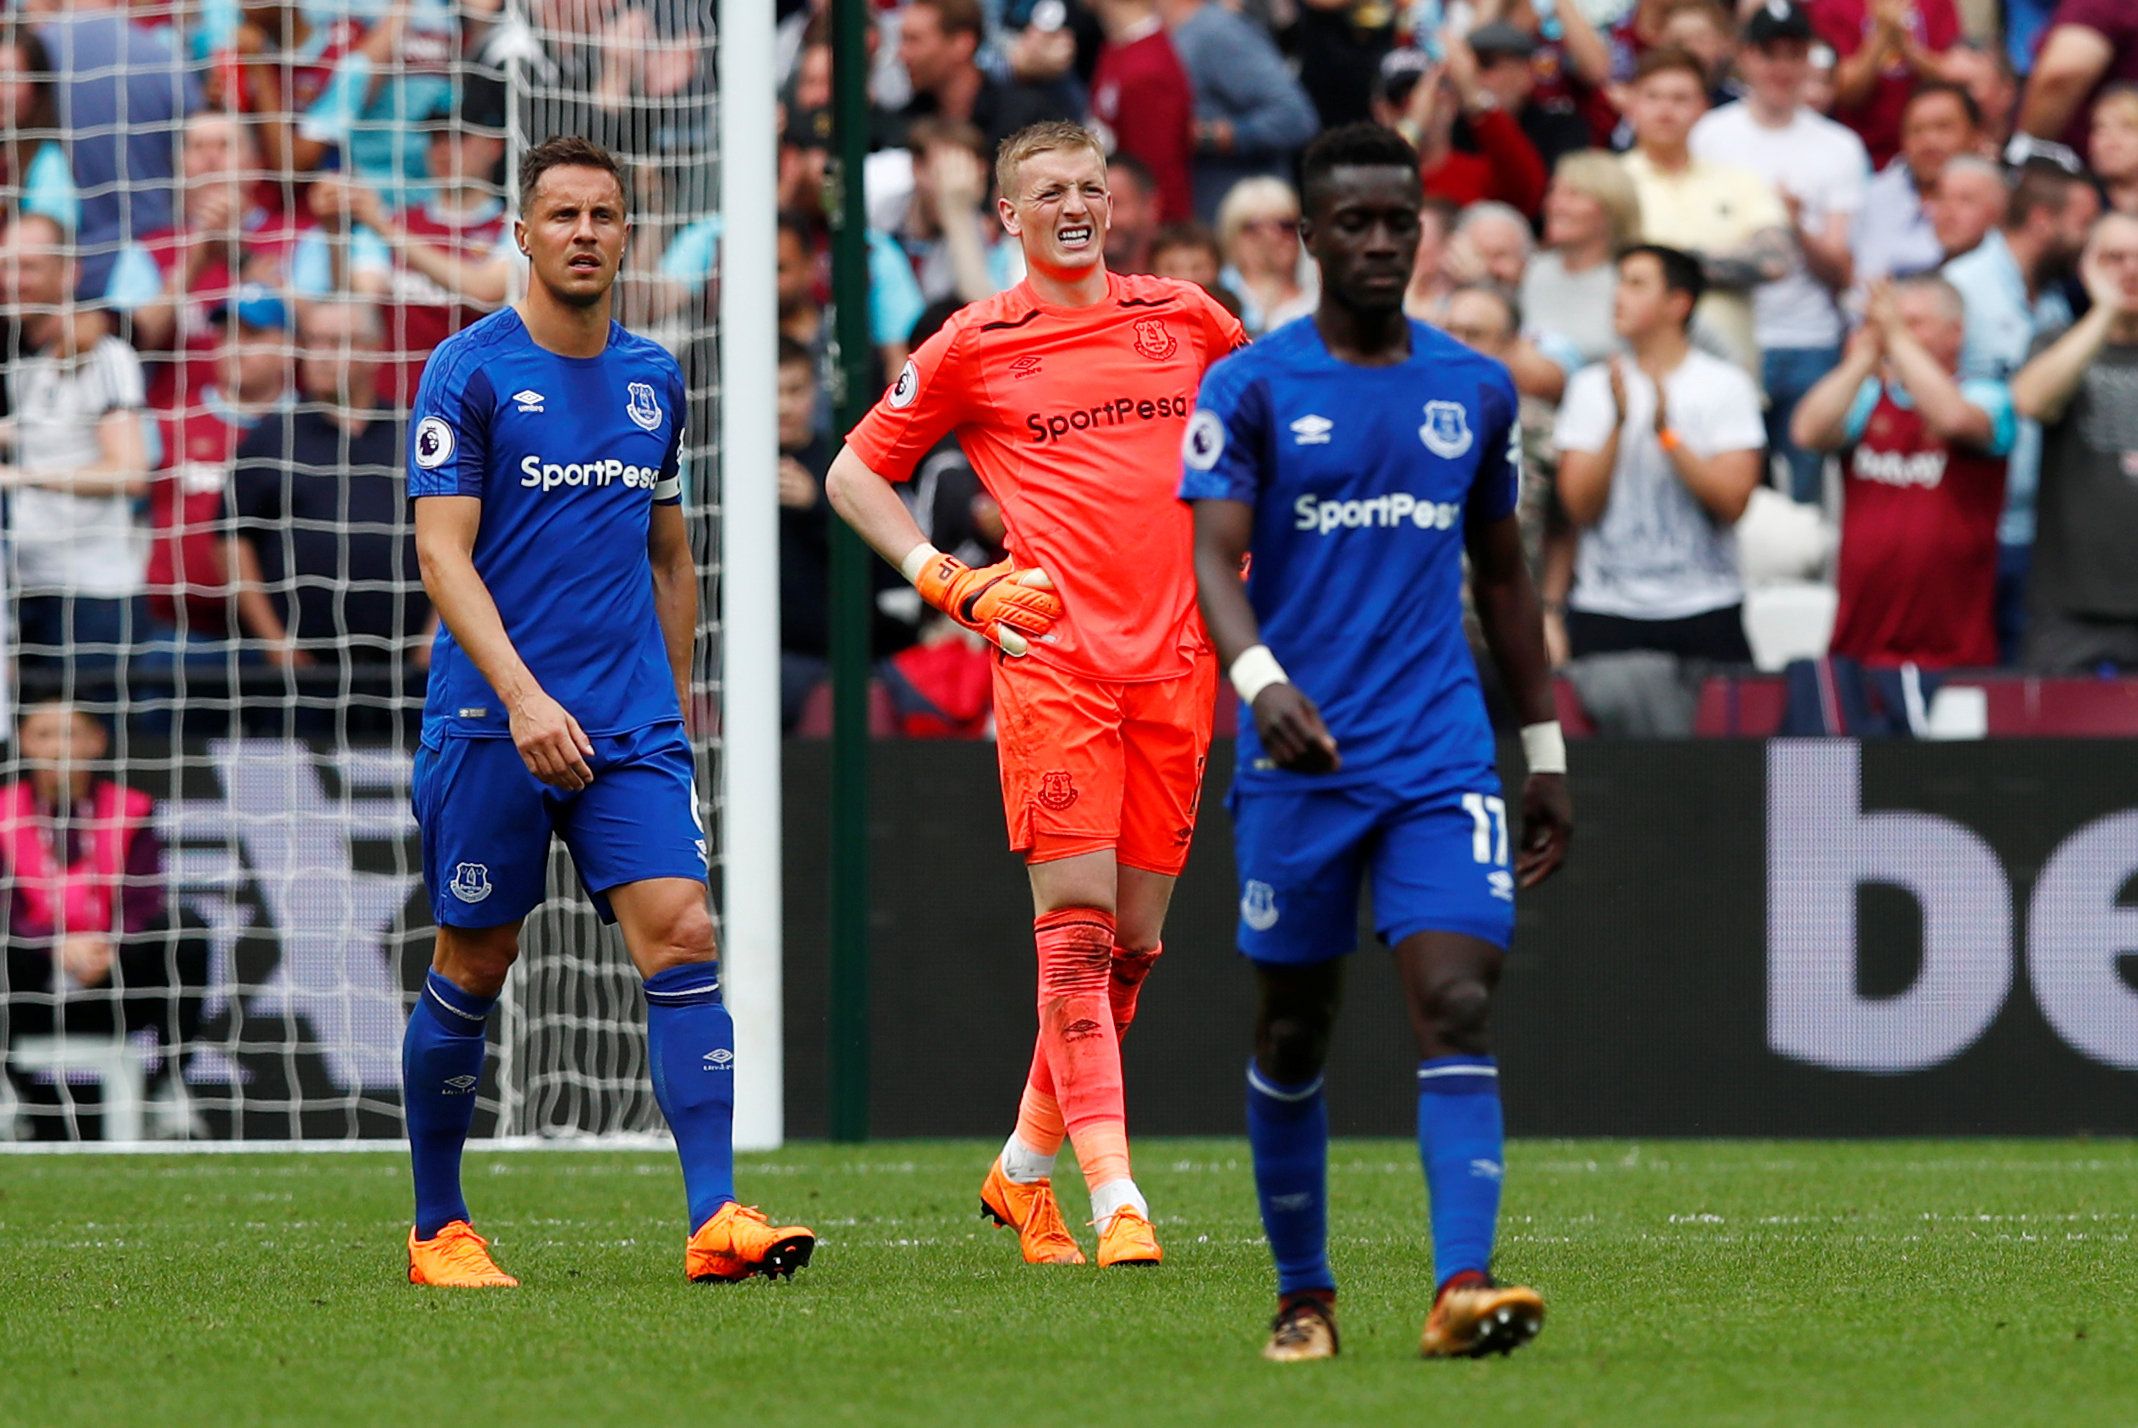 Soccer Football - Premier League - West Ham United vs Everton - London Stadium, London, Britain - May 13, 2018   (L - R) Everton's Phil Jagielka, Jordan Pickford and Idrissa Gueye react after conceding their second goal scored by West Ham United's Marko Arnautovic    REUTERS/Eddie Keogh    EDITORIAL USE ONLY. No use with unauthorized audio, video, data, fixture lists, club/league logos or 